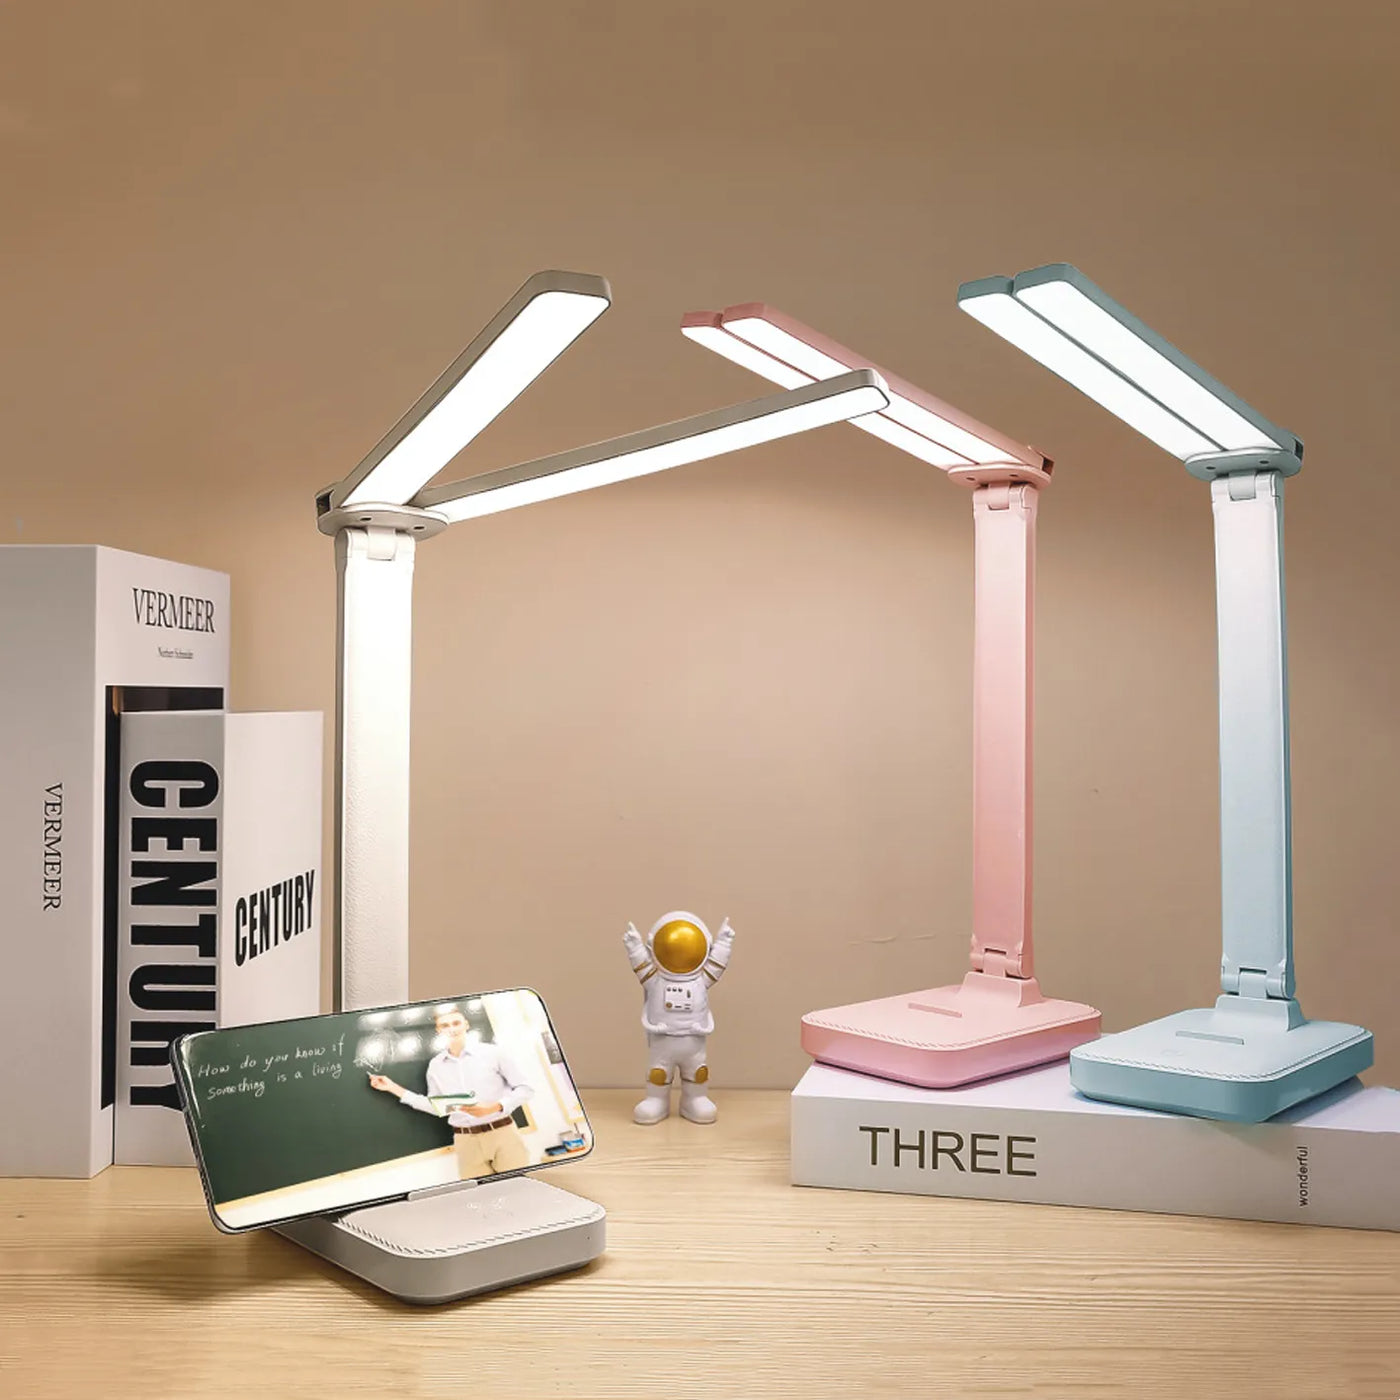 LED Desk Lamp - 3-Level Dimmable, Touch Control, USB Rechargeable, Foldable for Bedroom